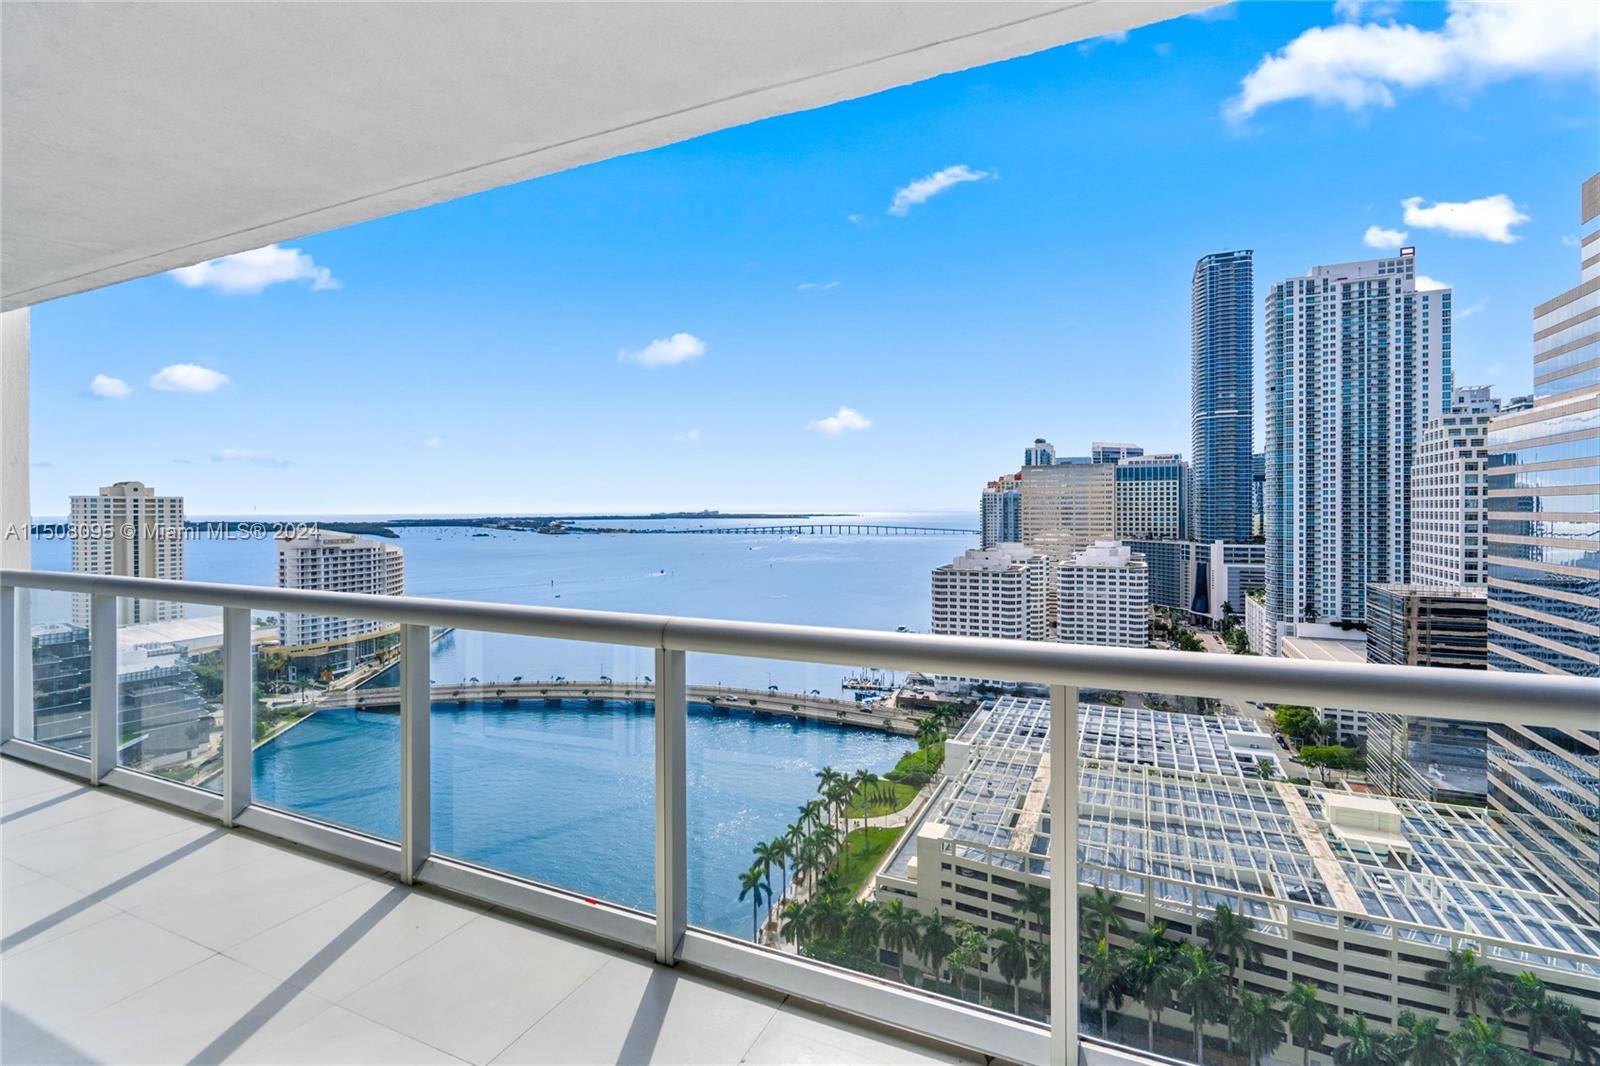 Experience the Brickell lifestyle in this charming 2 bed, 2 bath, 1 Den luxury condo.